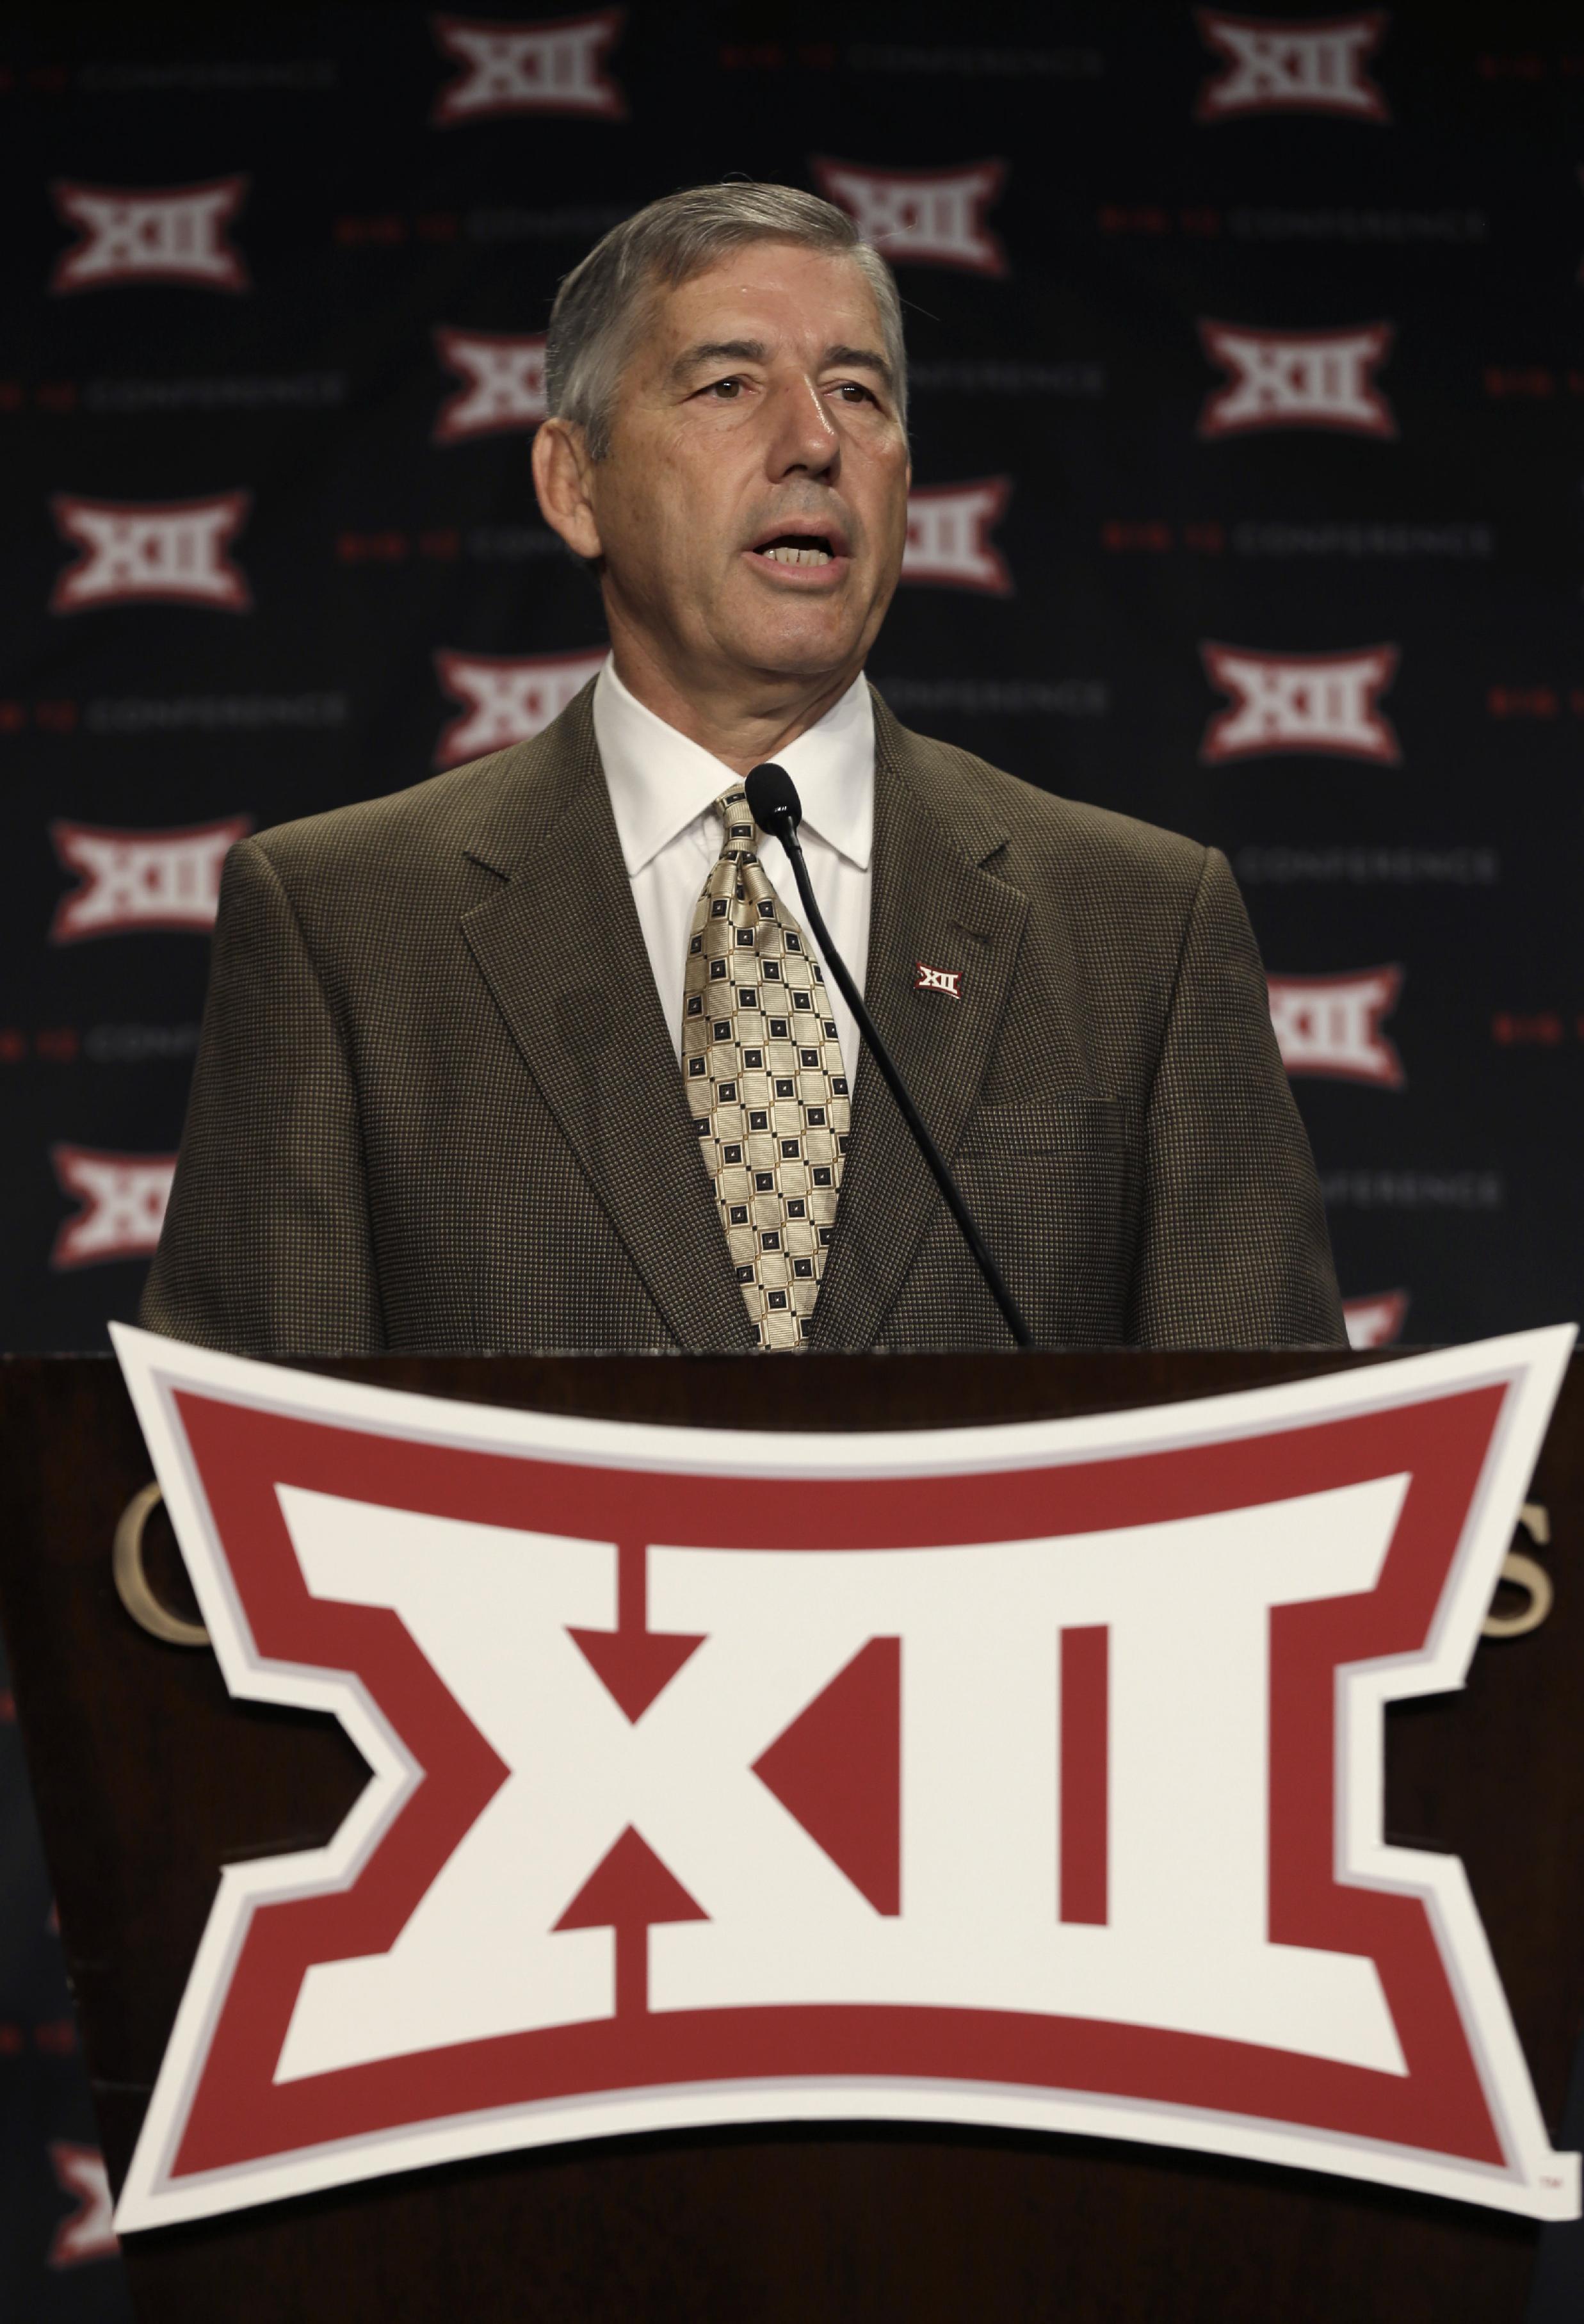 Big 12 commissioner Bob Bowlsby speaks at the opening of the NCAA college Big 12 Conference football media days in Dallas, Monday, July 21, 2014. (AP Photo/LM Otero)